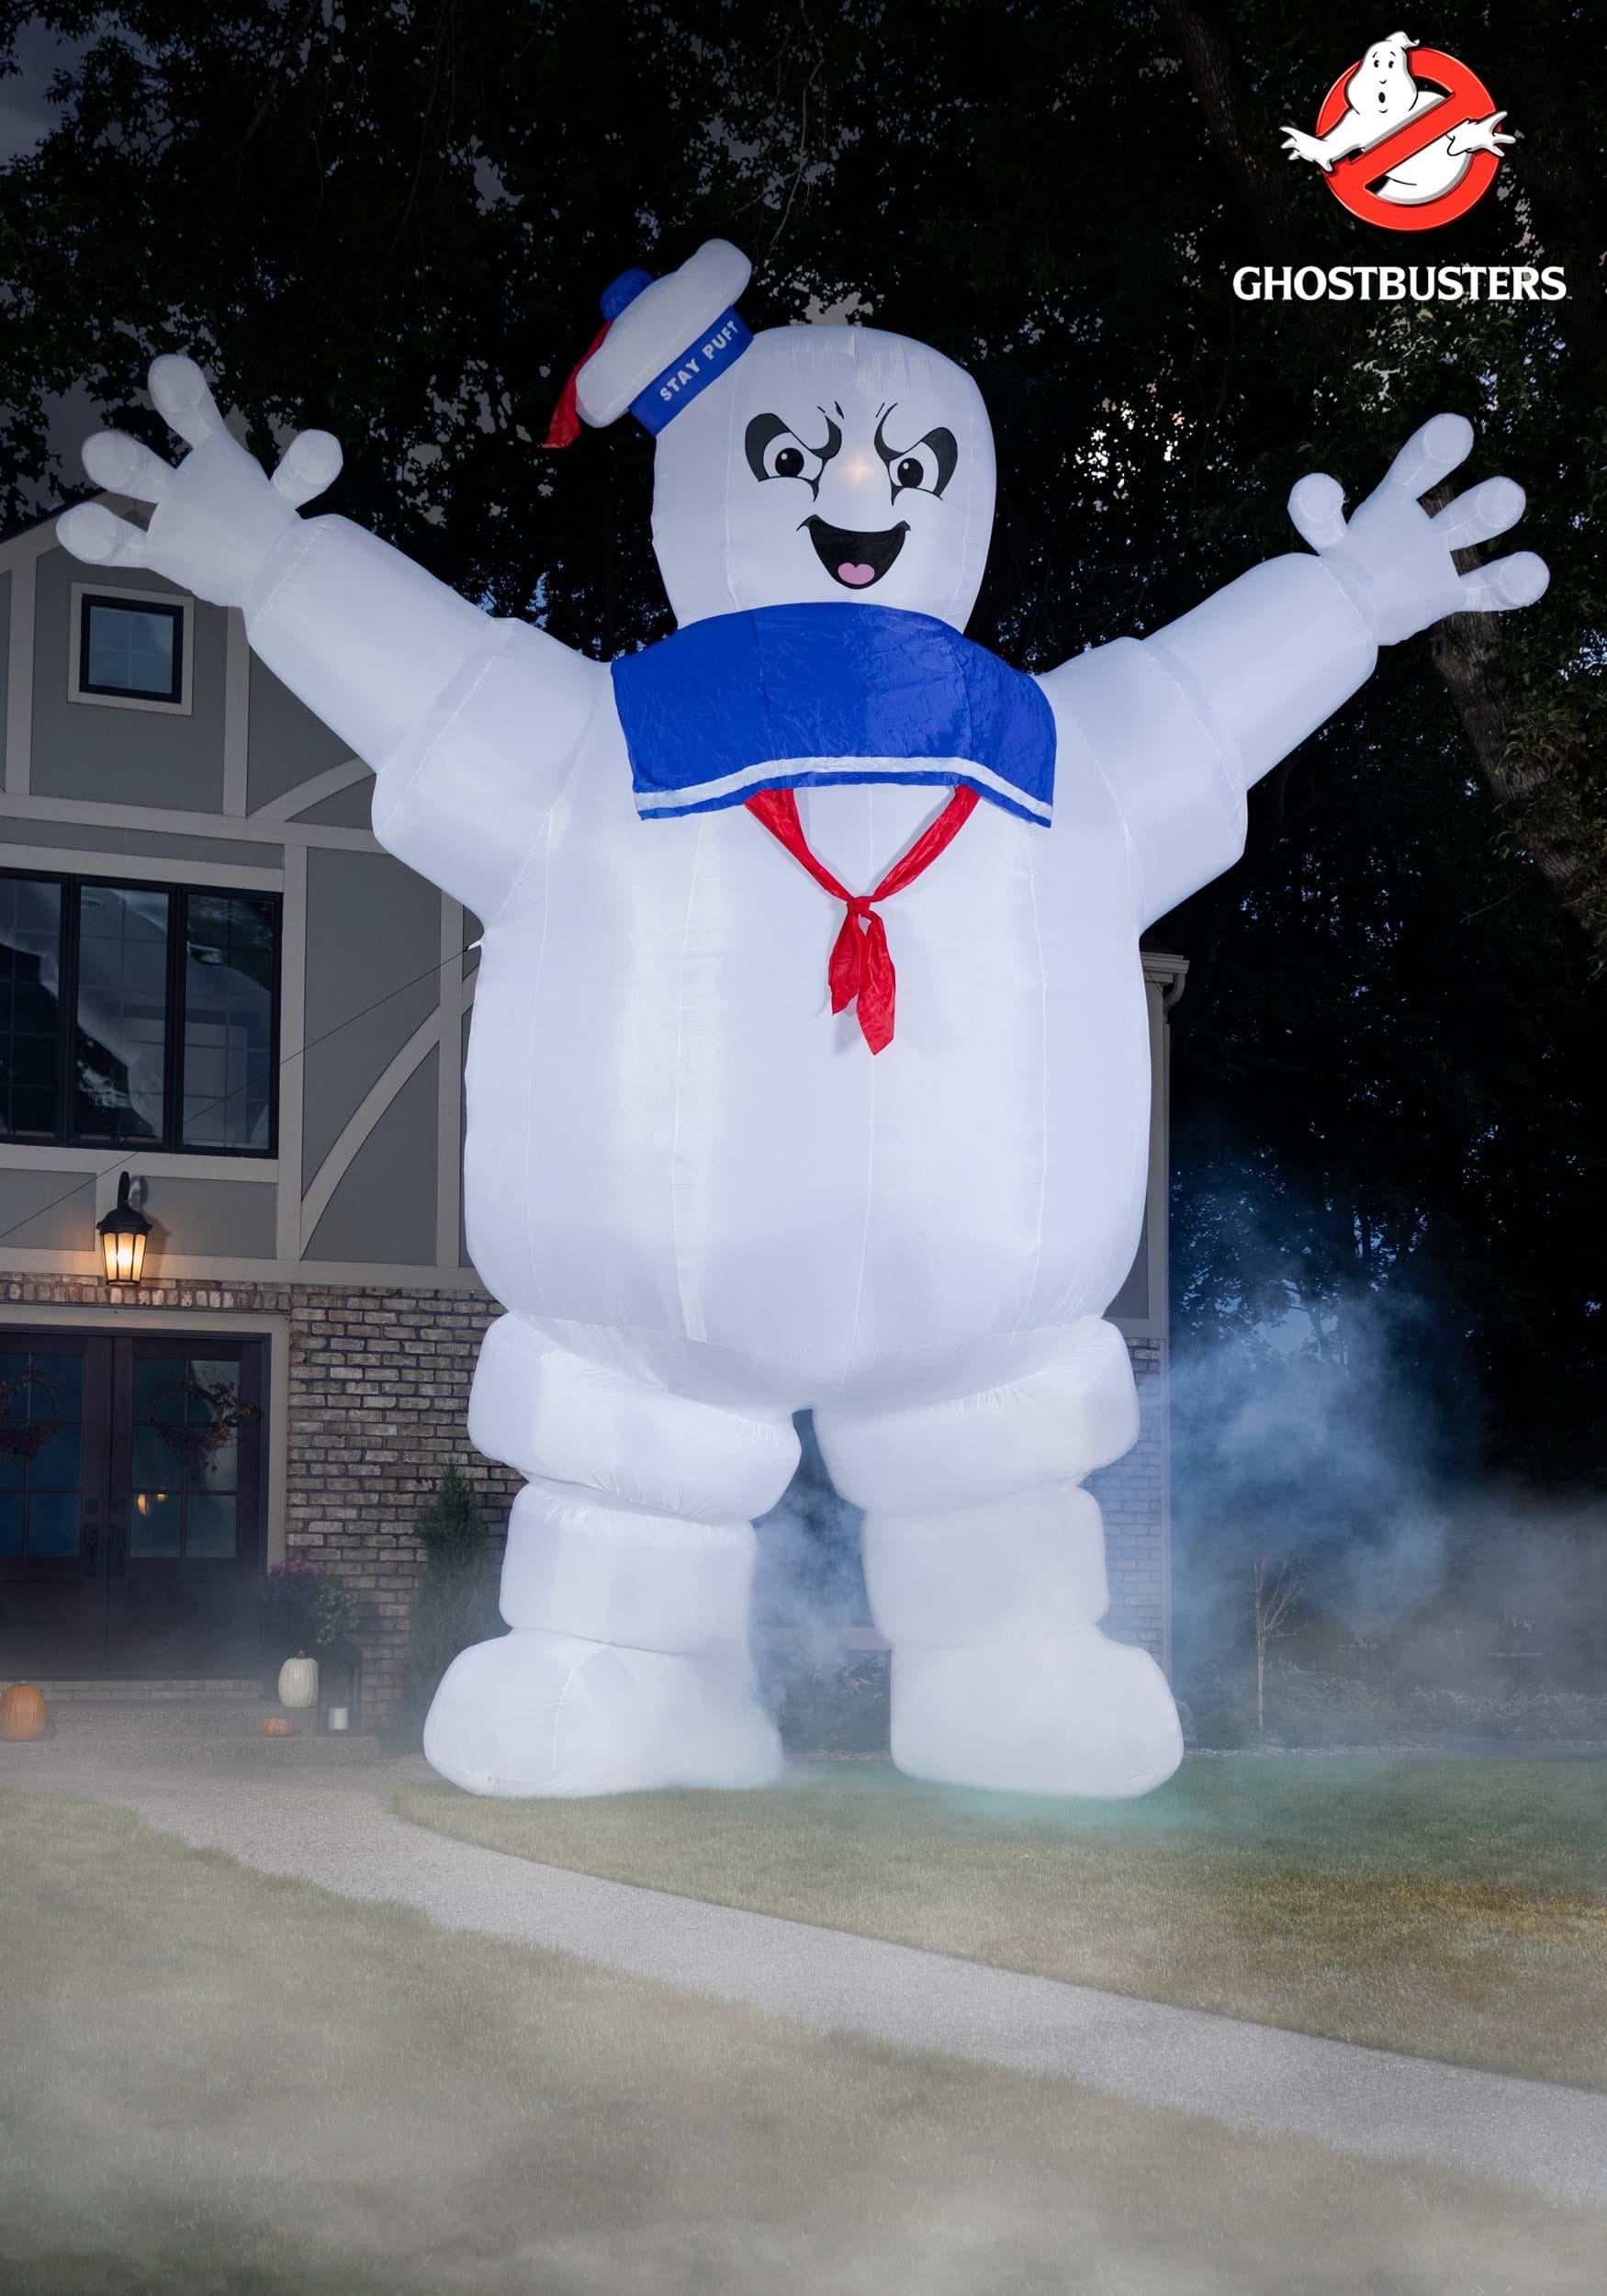 Ghostbusters Outdoor Decorations, Halloween Yard Decor - Ghostbusters 25FT Inflatable Stay Puft Marshmallow Man Decoration